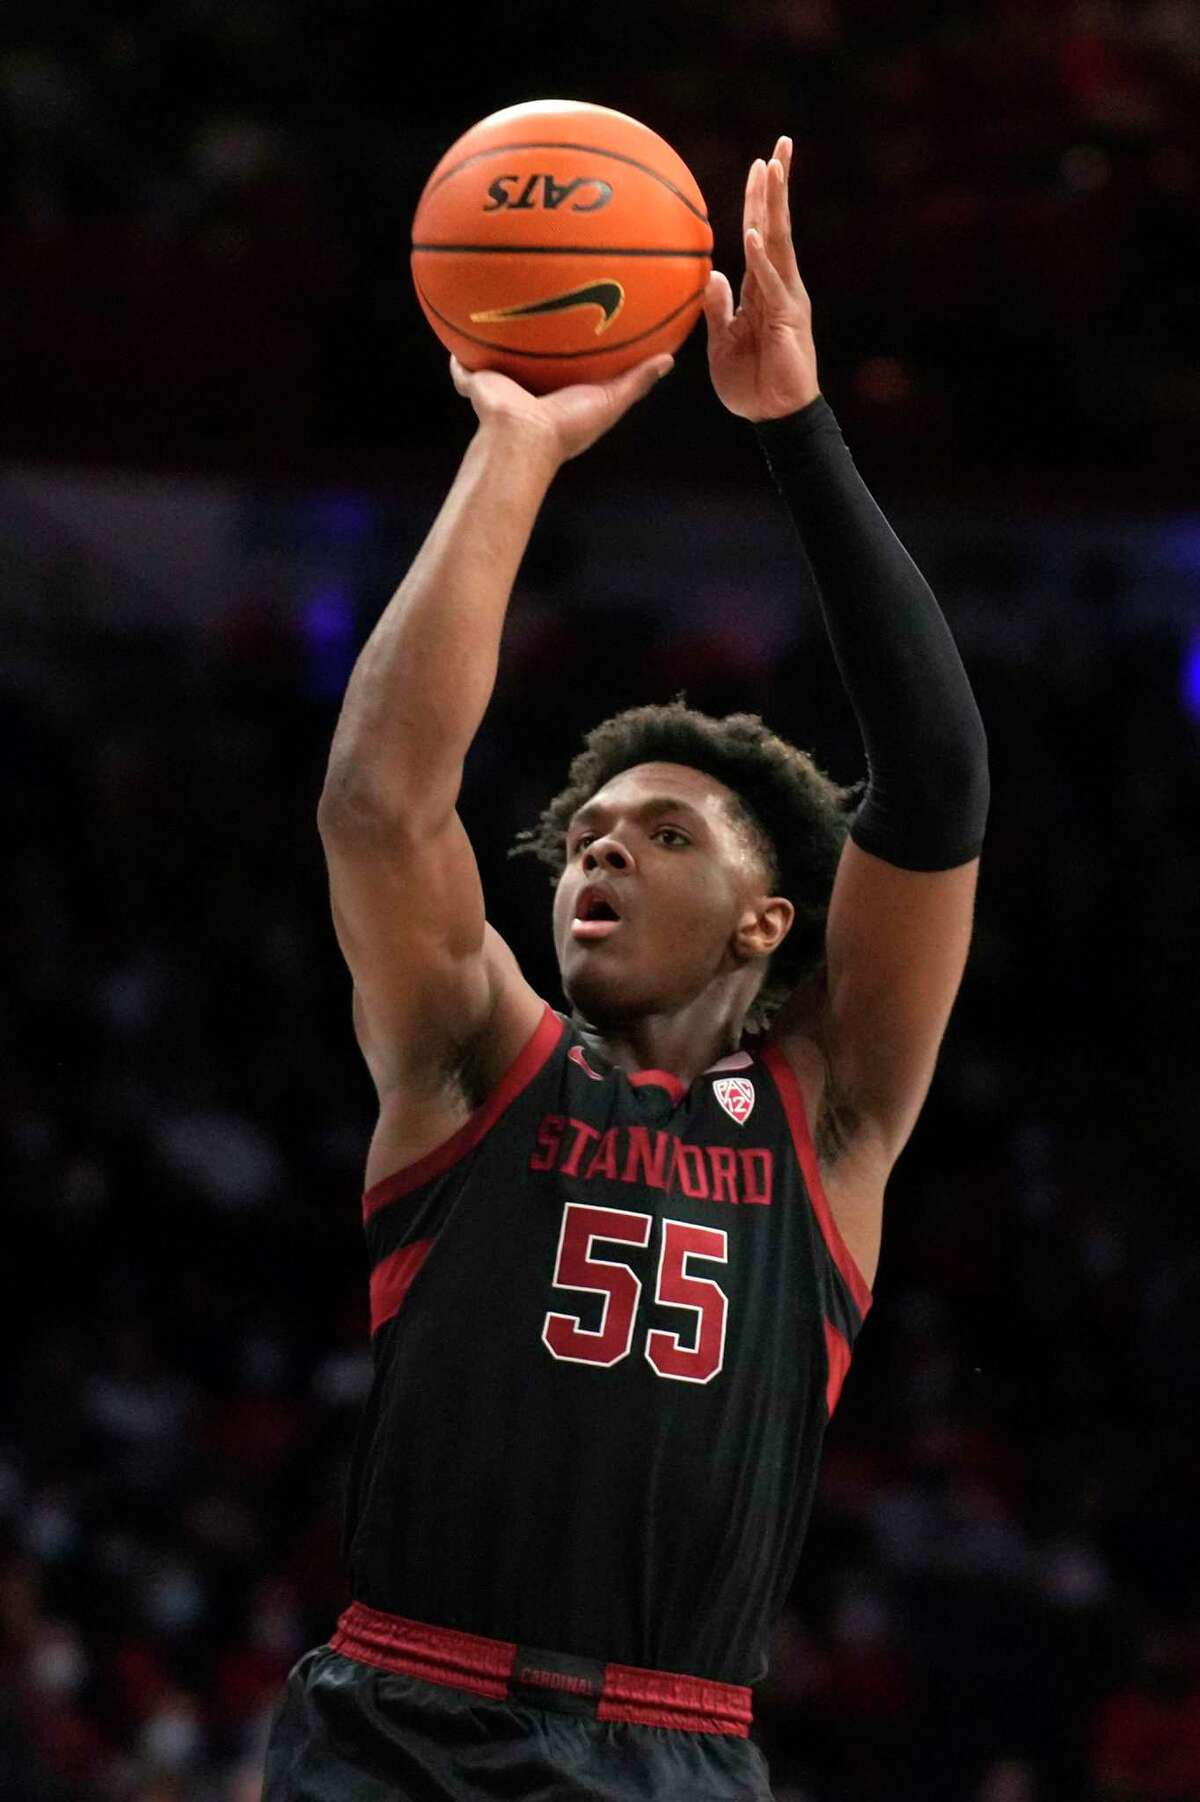 Stanford forward Harrison Ingram intends to enter the NBA draft after averaging 10.5 points as a freshman this season.